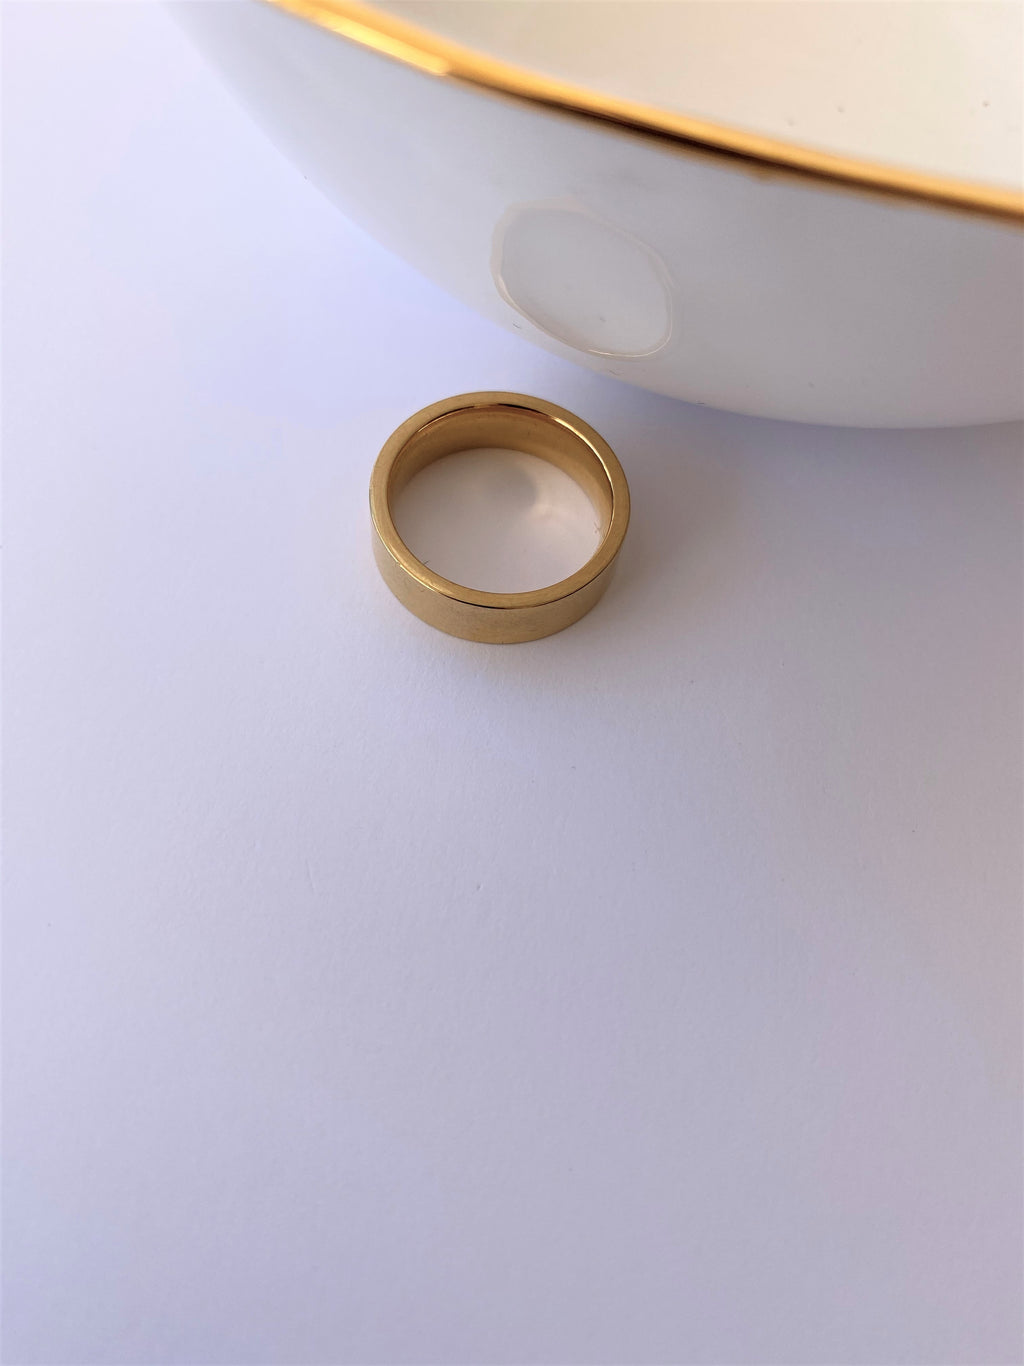 GOLD-PLATED BAND (6mm)